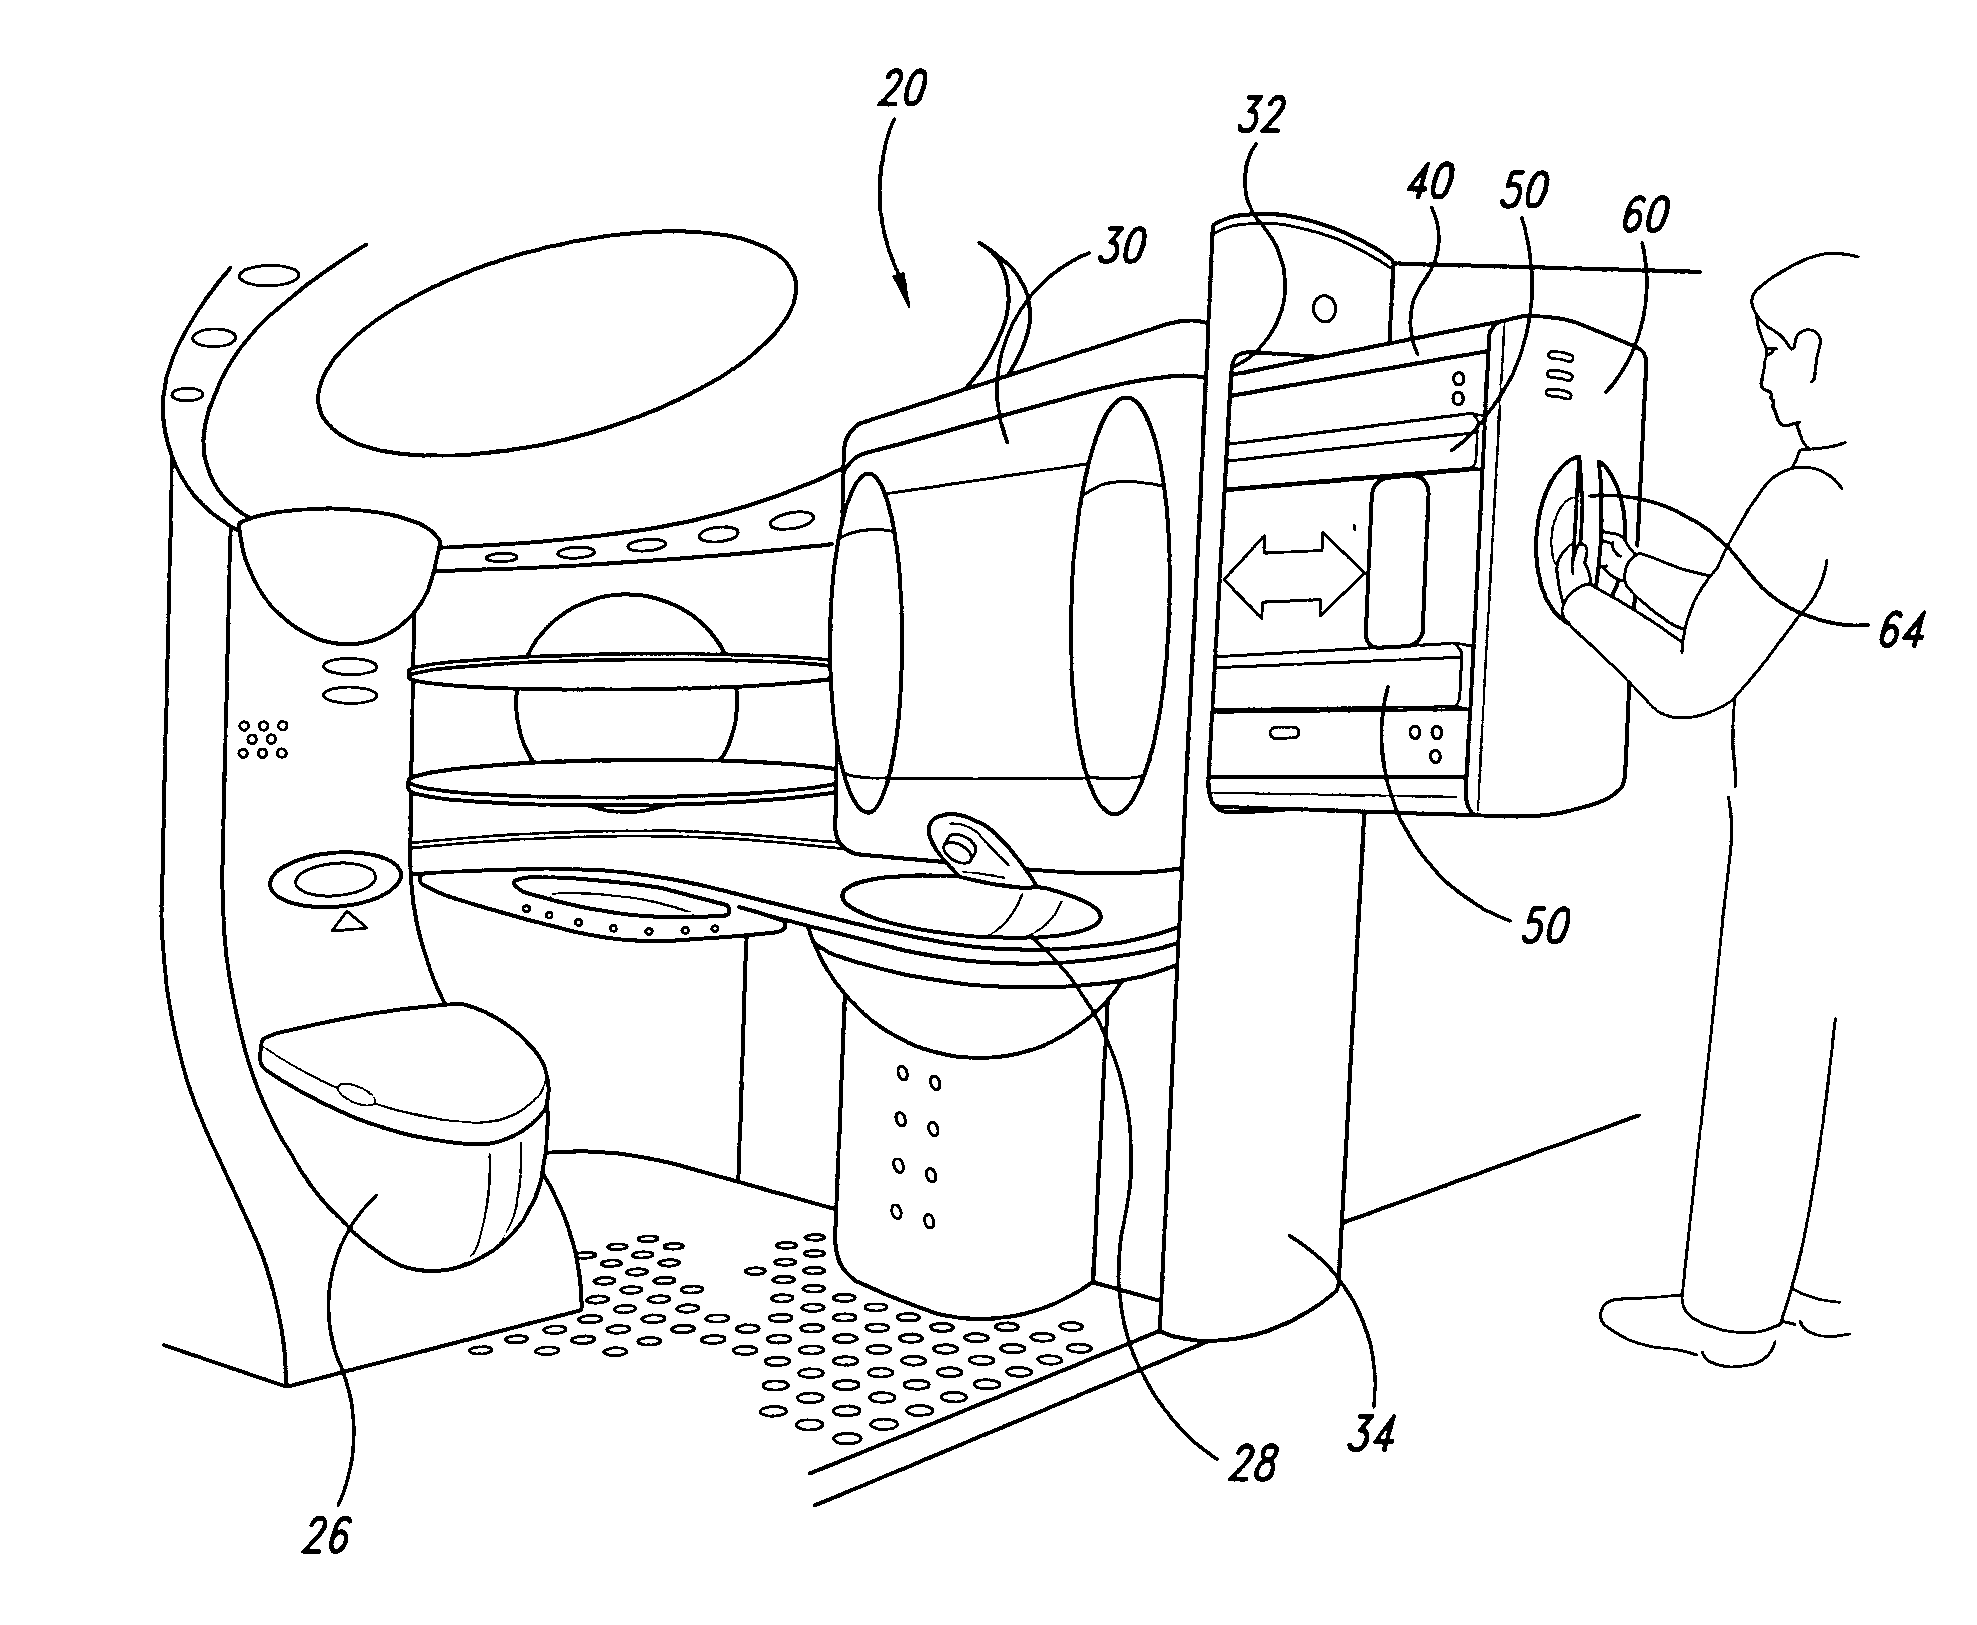 Lavatory fast pack system and method